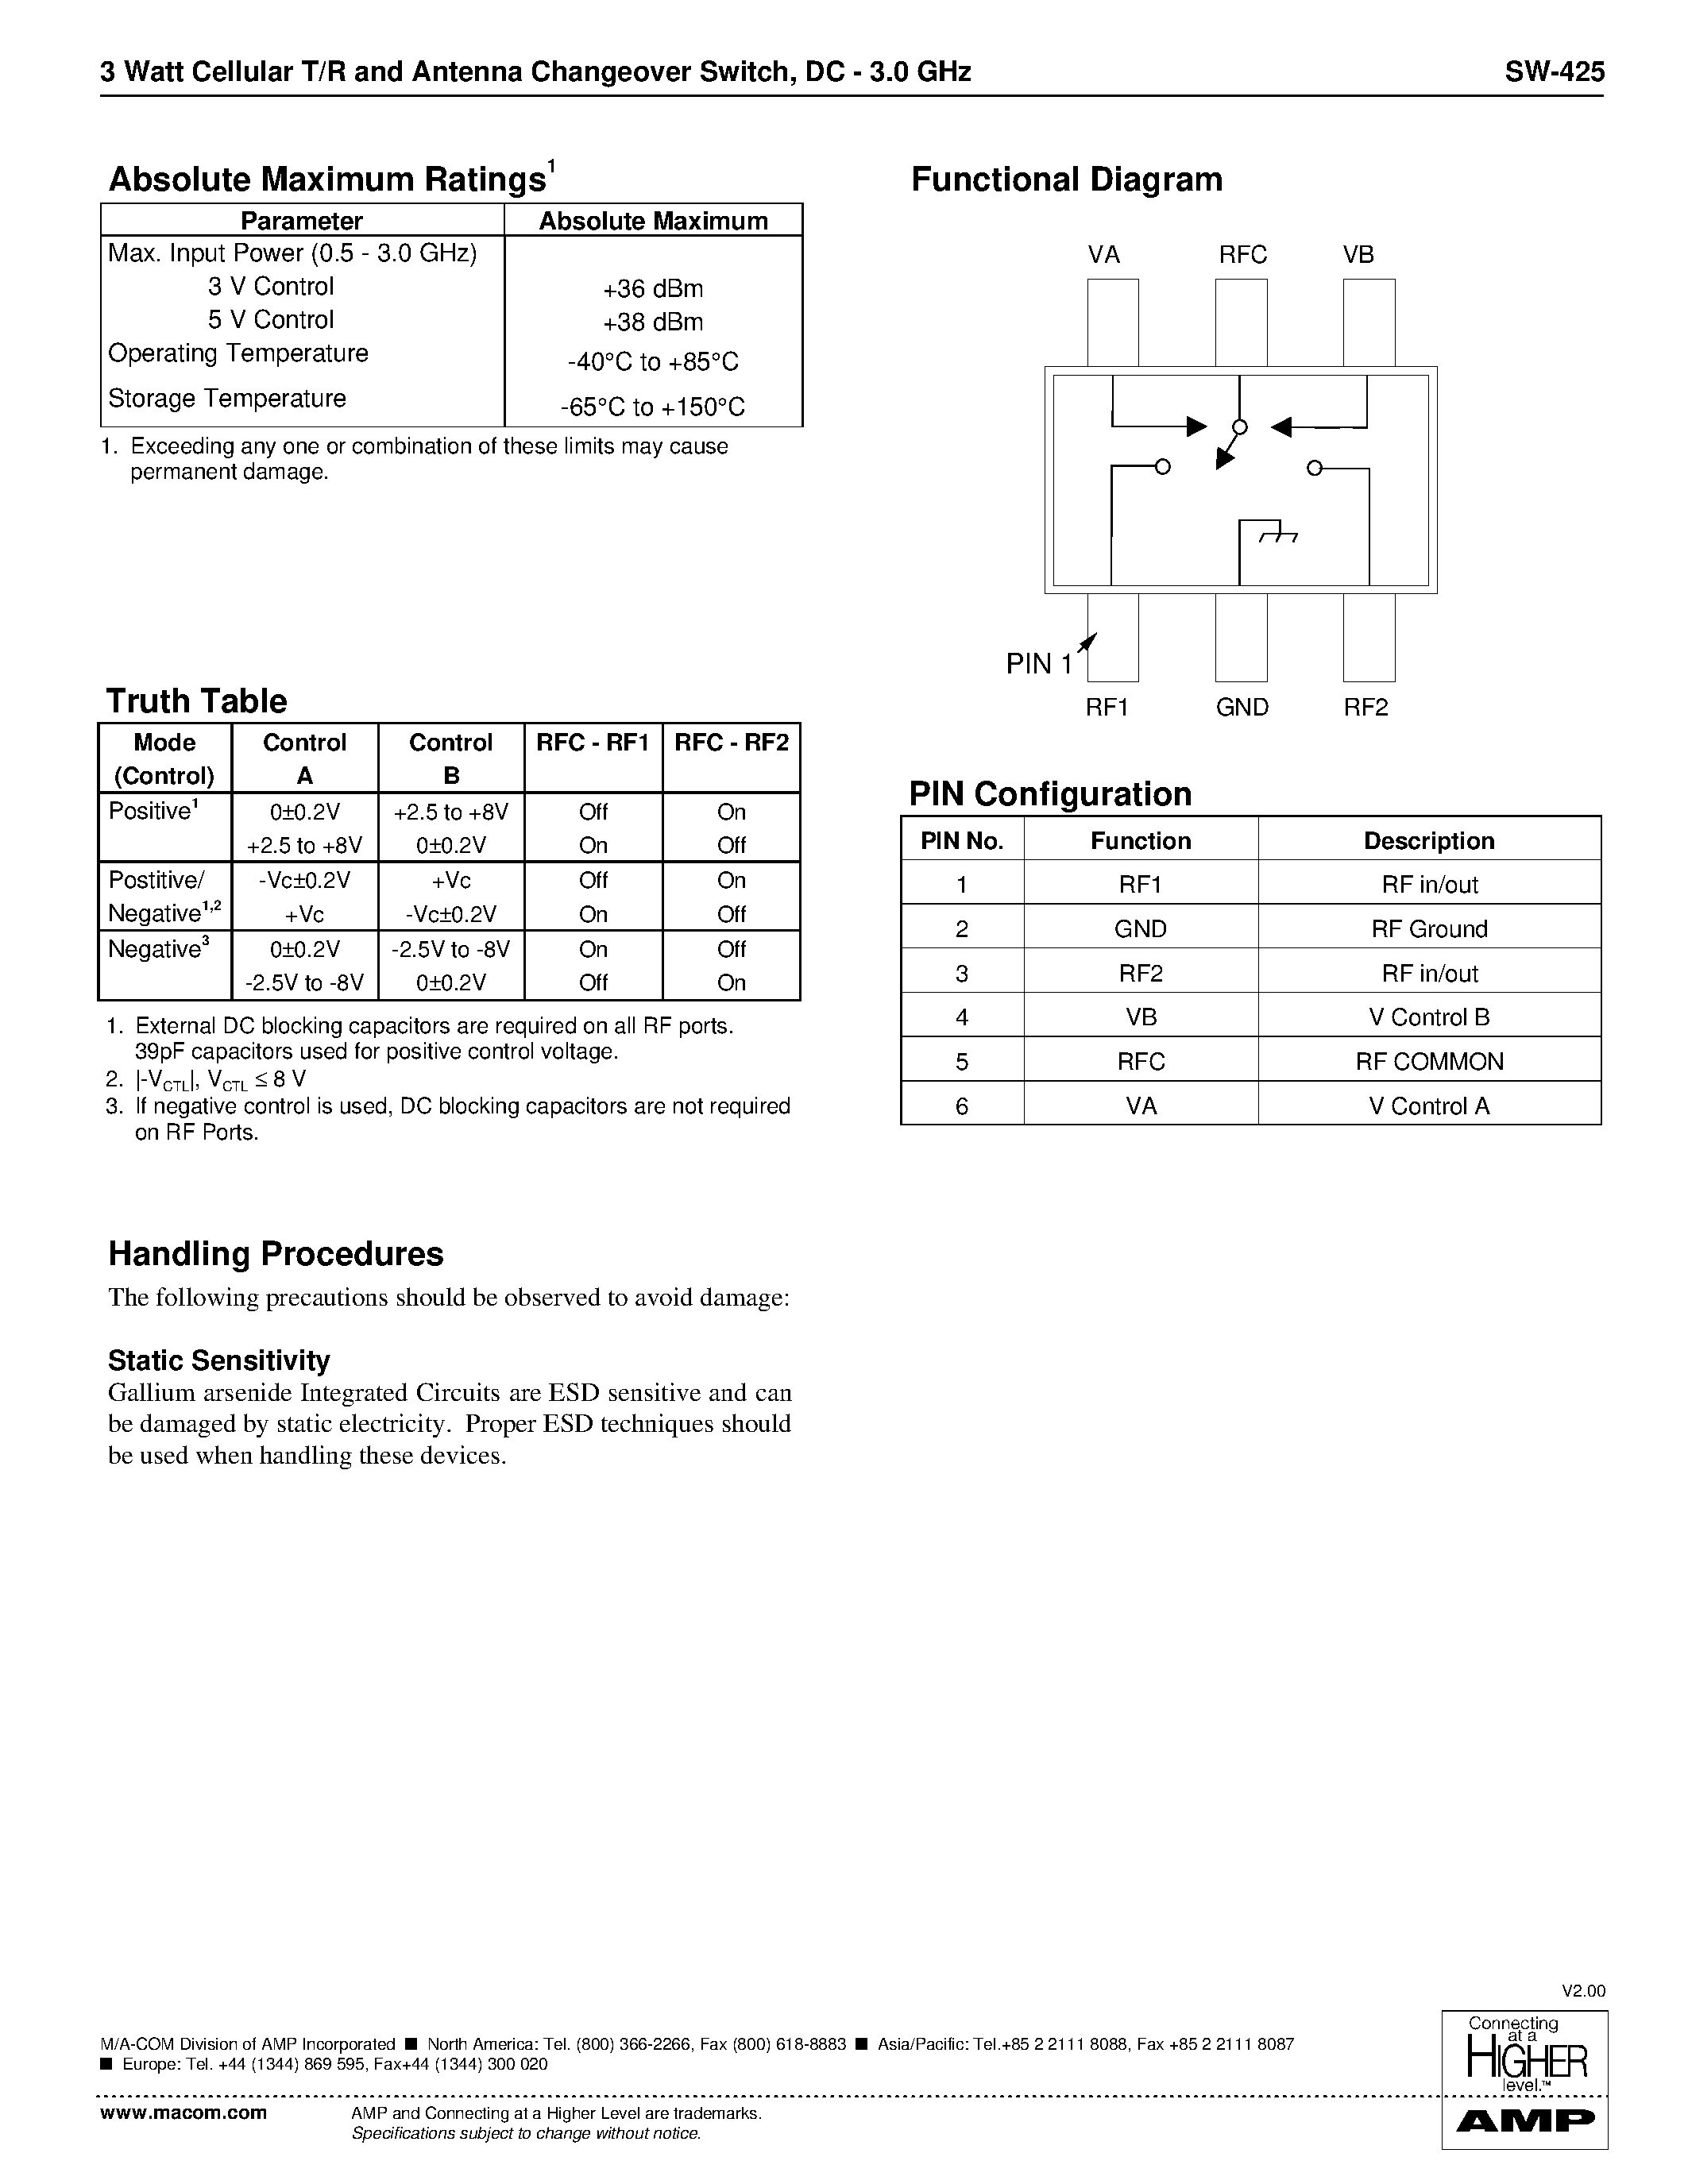 Datasheet SW-425 - 3 Watt Cellular T/R and Antenna Changeover Switch page 2